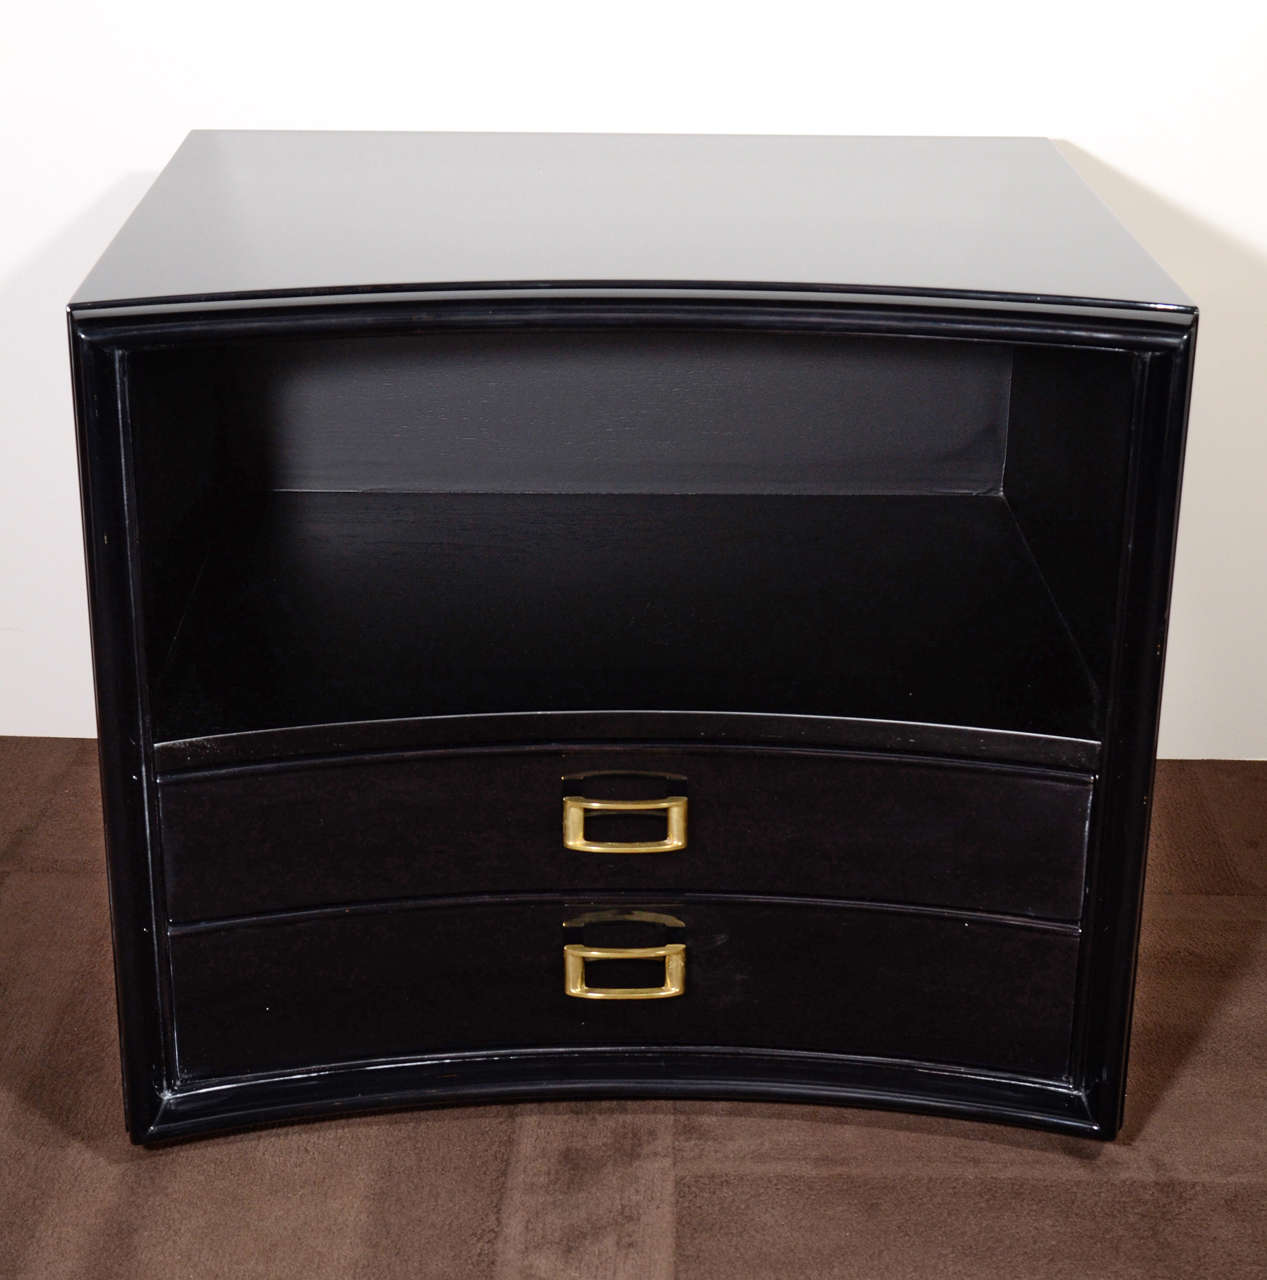 Exceptional end table or nightstand with modernist curved or bowed front. The table is conveniently fitted with two lower drawers as well as an upper open shelving or display area. Excellent design in ebonized walnut wood and with stylized brass